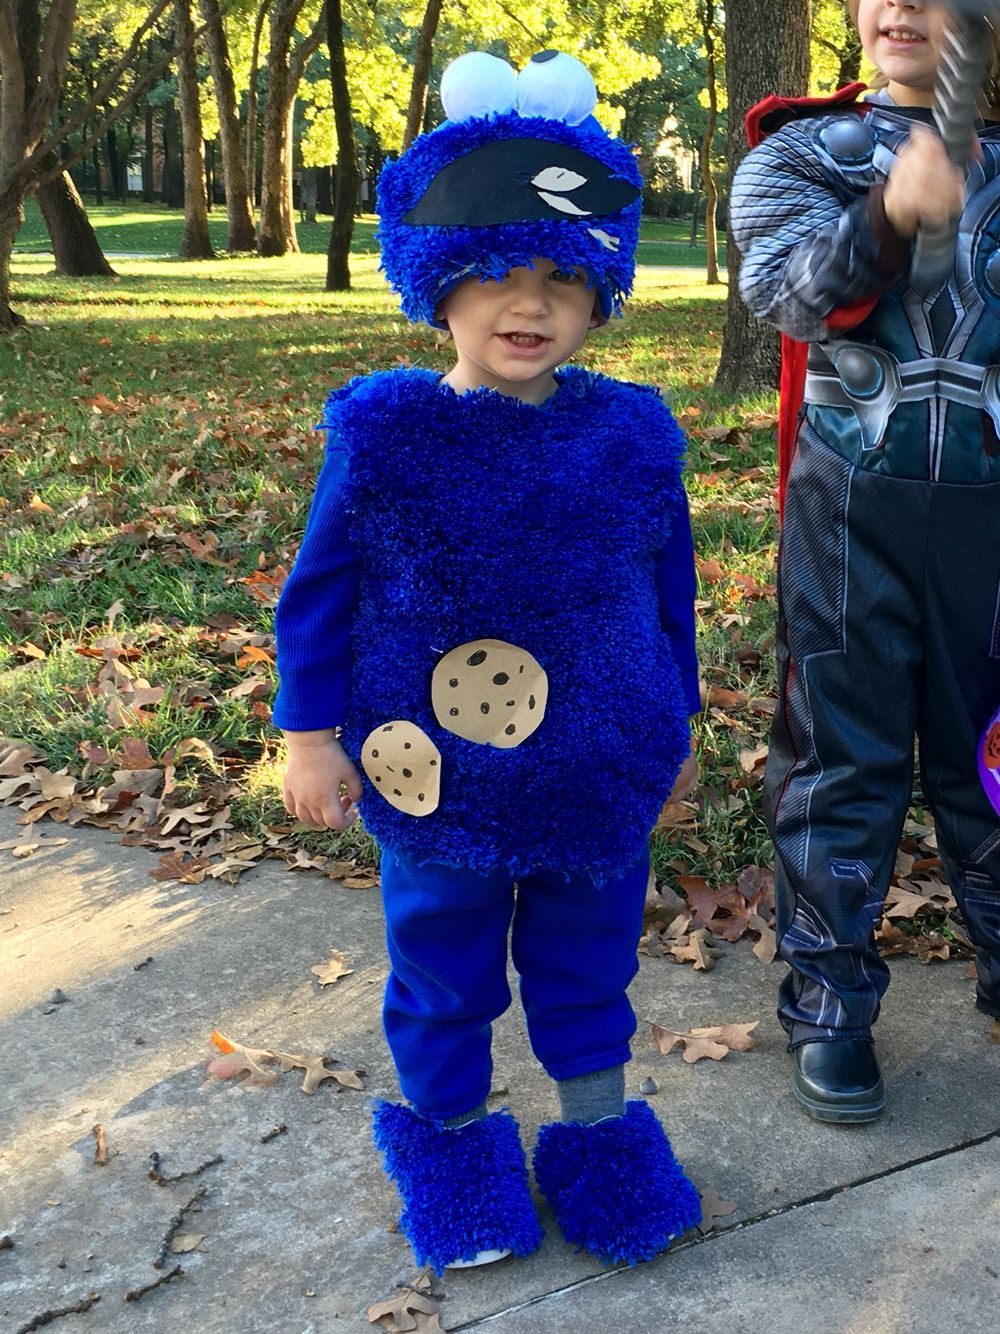 DIY Toddler Monster Costume
 DIY Toddler Cookie Monster Costume made with blue sweat